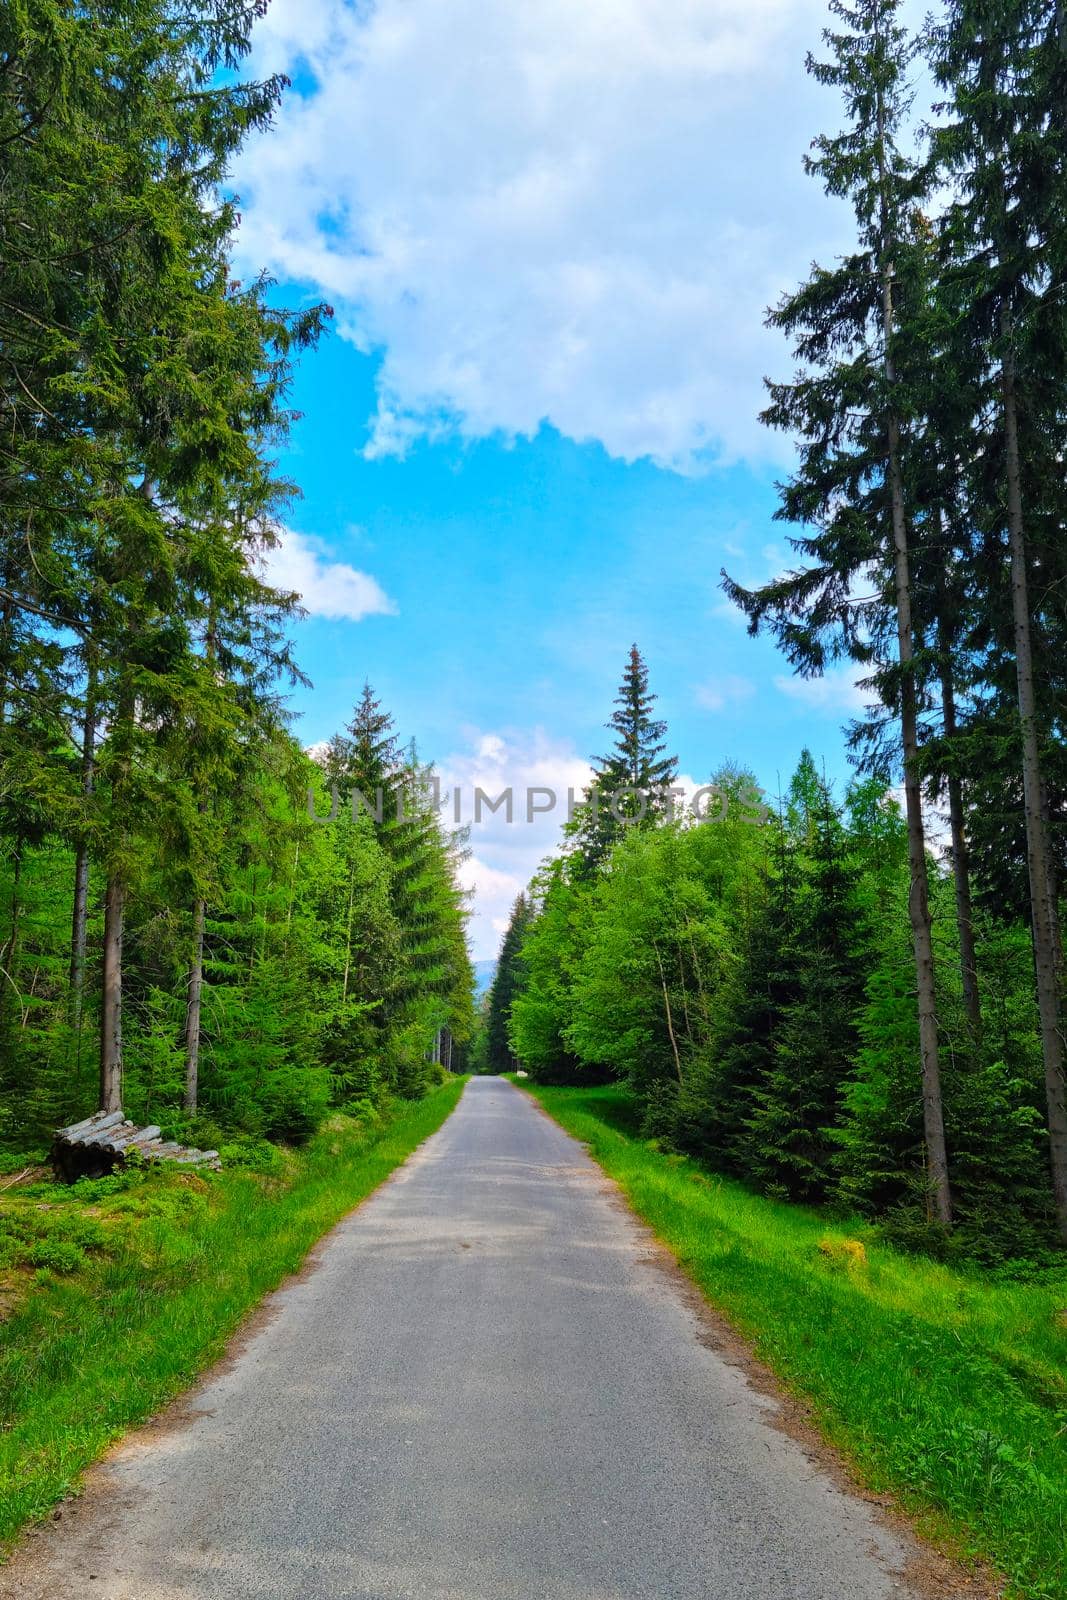 A picturesque road along the green forest. Clean air. by kip02kas